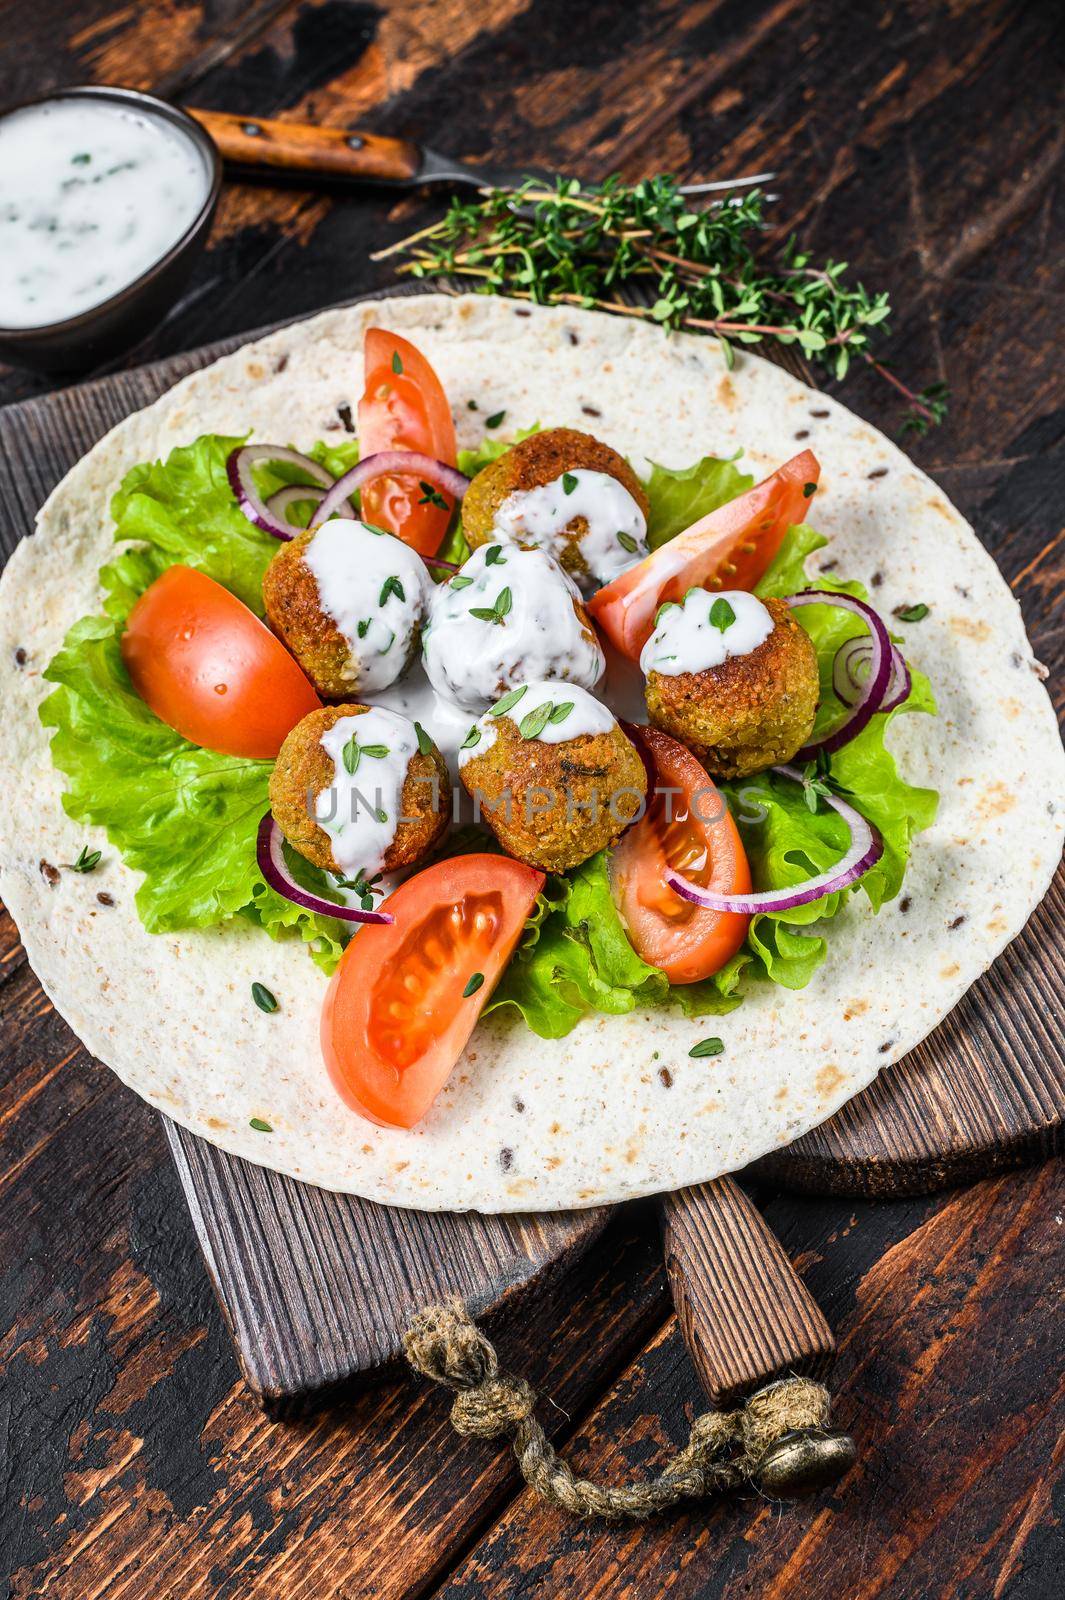 Vegetarian falafel with vegetables and tzatziki sauce on a tortilla bread. Dark wooden background. Top view by Composter